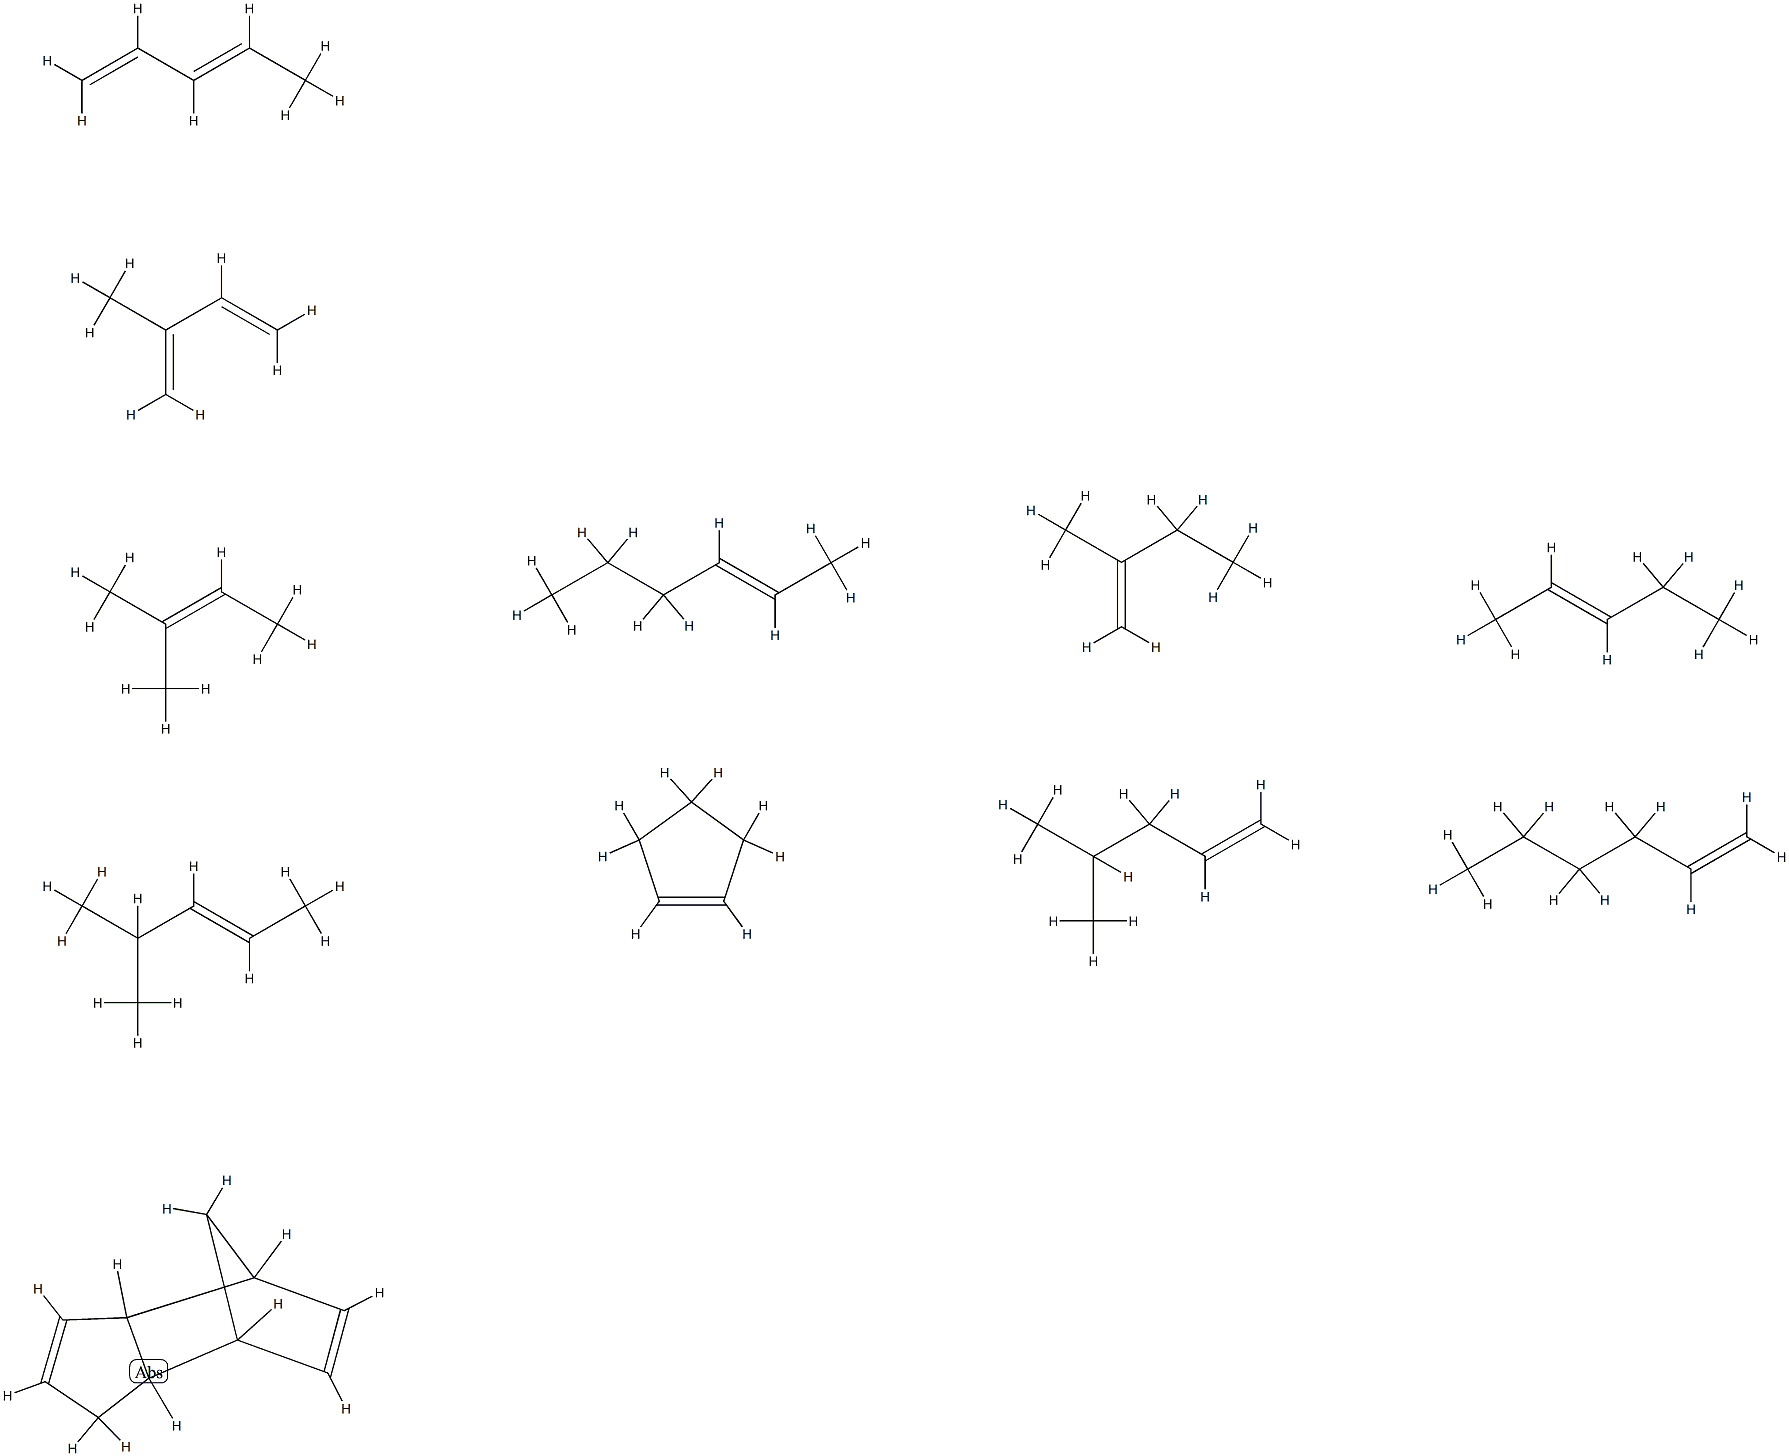 4,7-Methano-1H-indene, 3a,4,7,7a-tetrahydro-, polymer with cyclopentene, 1-hexene, 2-hexene, 2-methyl-1,3-butadiene, 2-methyl-1-butene, 2-methyl-2-butene, 4-methyl-1-pentene, 4-methyl-2-pentene, 1,3-pentadiene and 2-pentene Structure